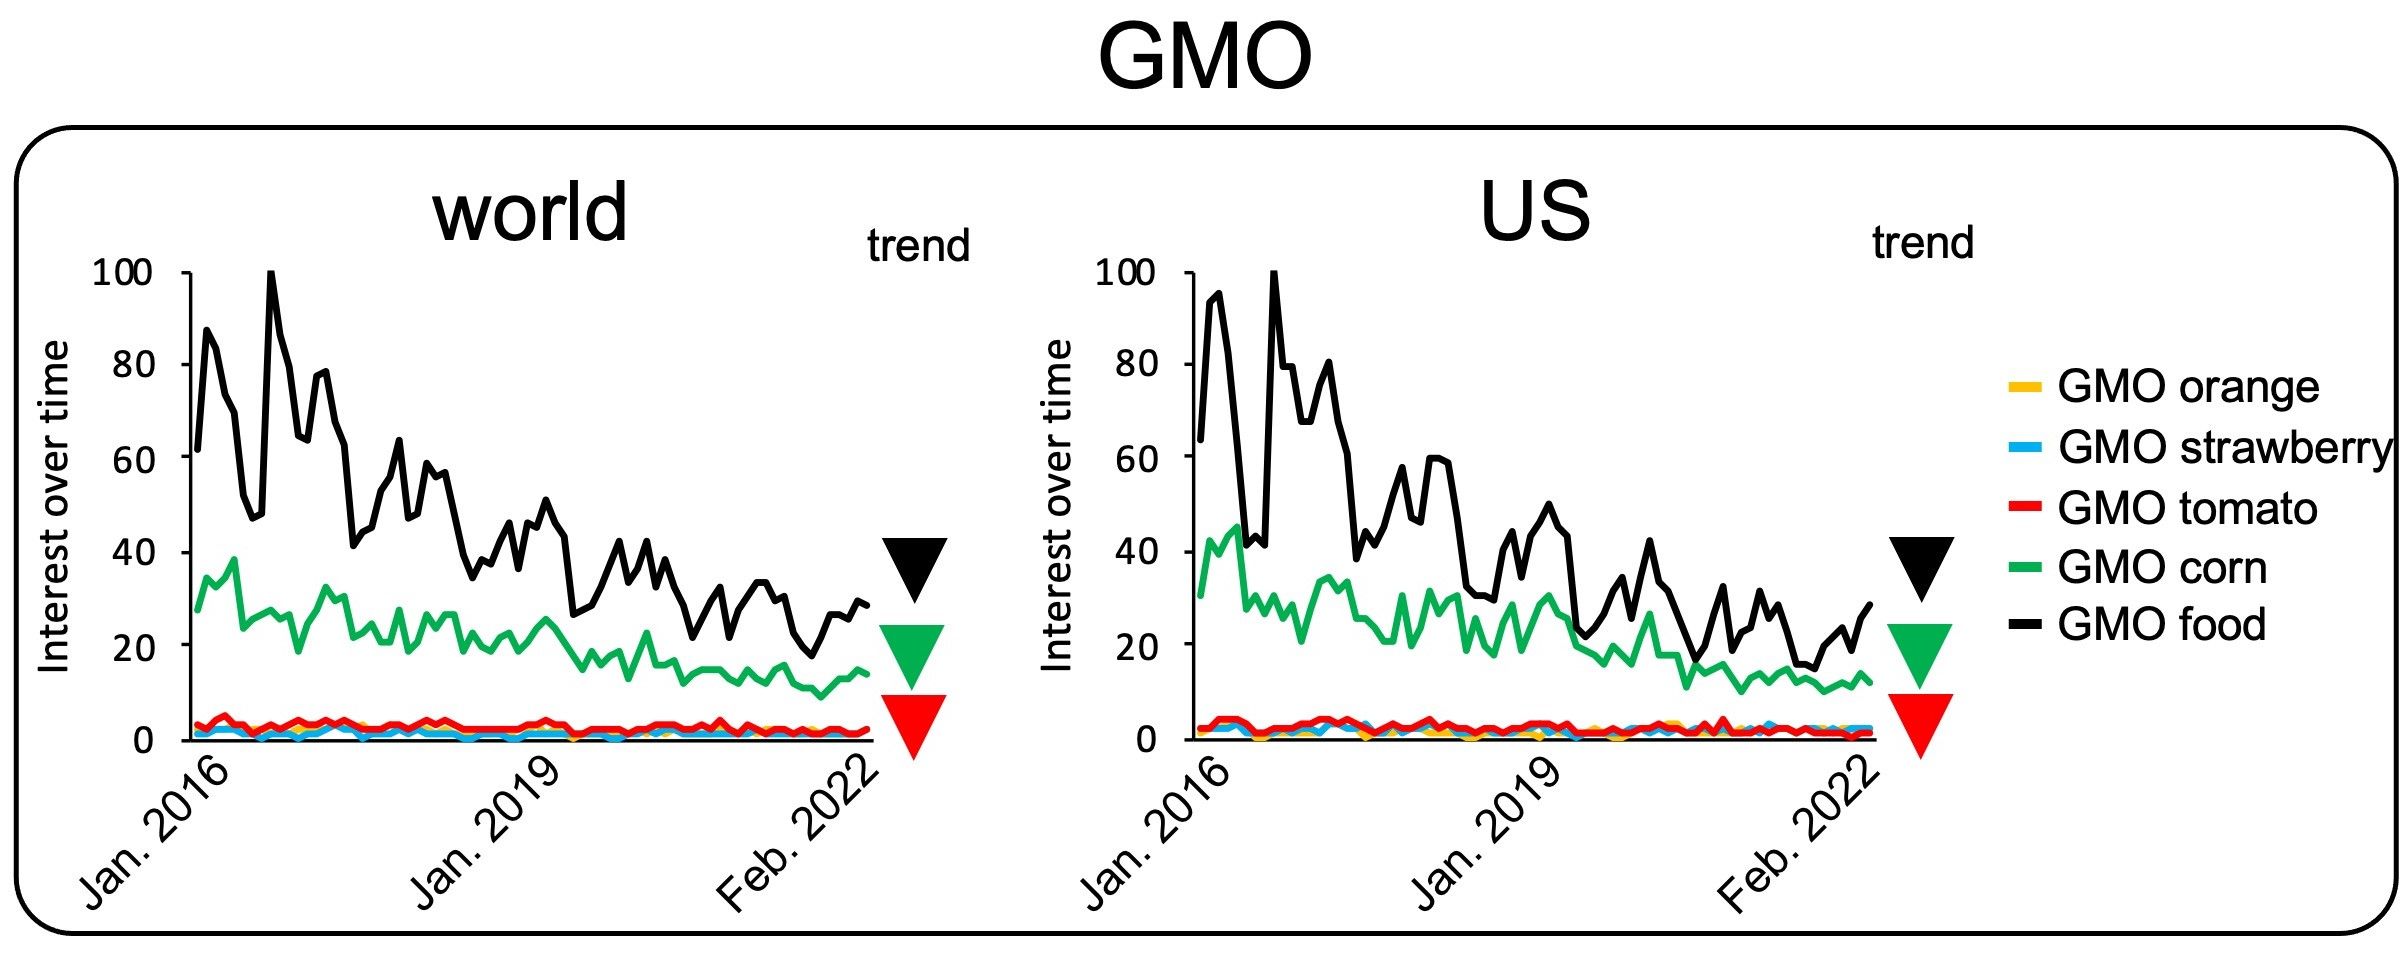 Search trends for “GMO orange,” “GMO strawberry,” “GMO tomato,” “GMO corn,” and “GMO food.” Ascending or descending triangles are shown if the change in search interest was statistically significant. Each triangle is color-coded based on the figure legend. 